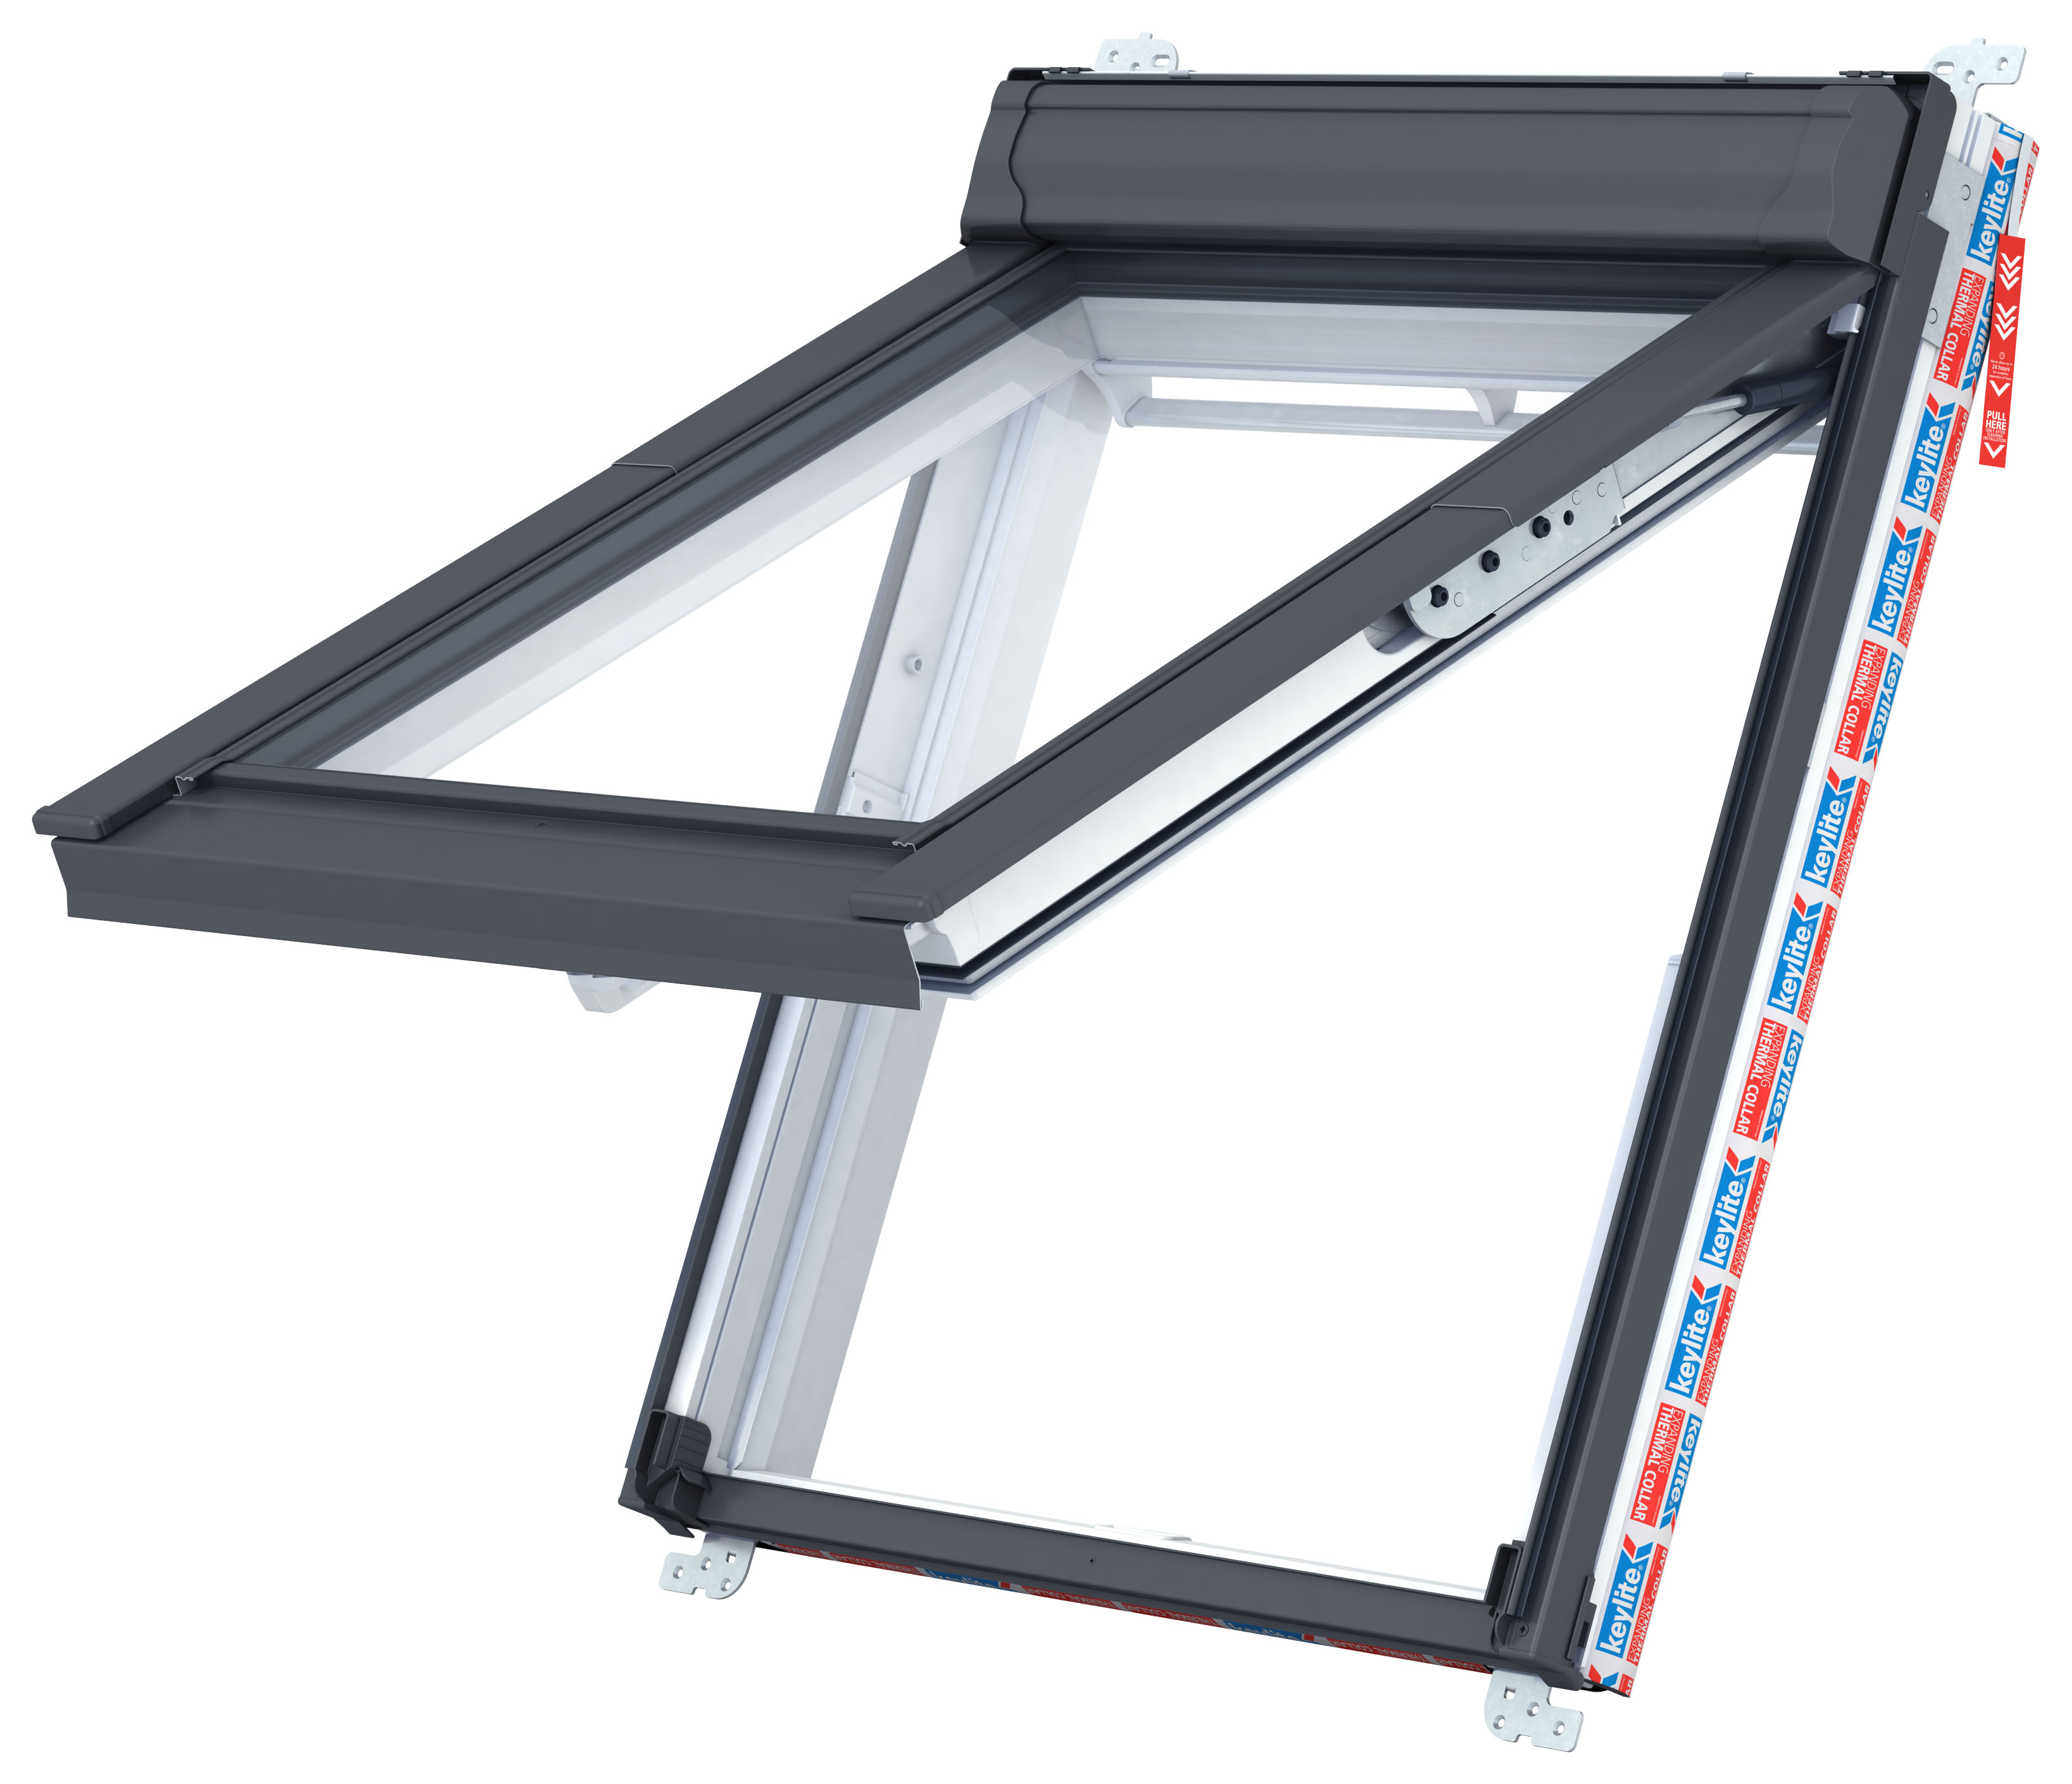 Image of Keylite PFE 06 HT PVC Fire Escape Hi-Therm Roof Window - 780 x 1400mm